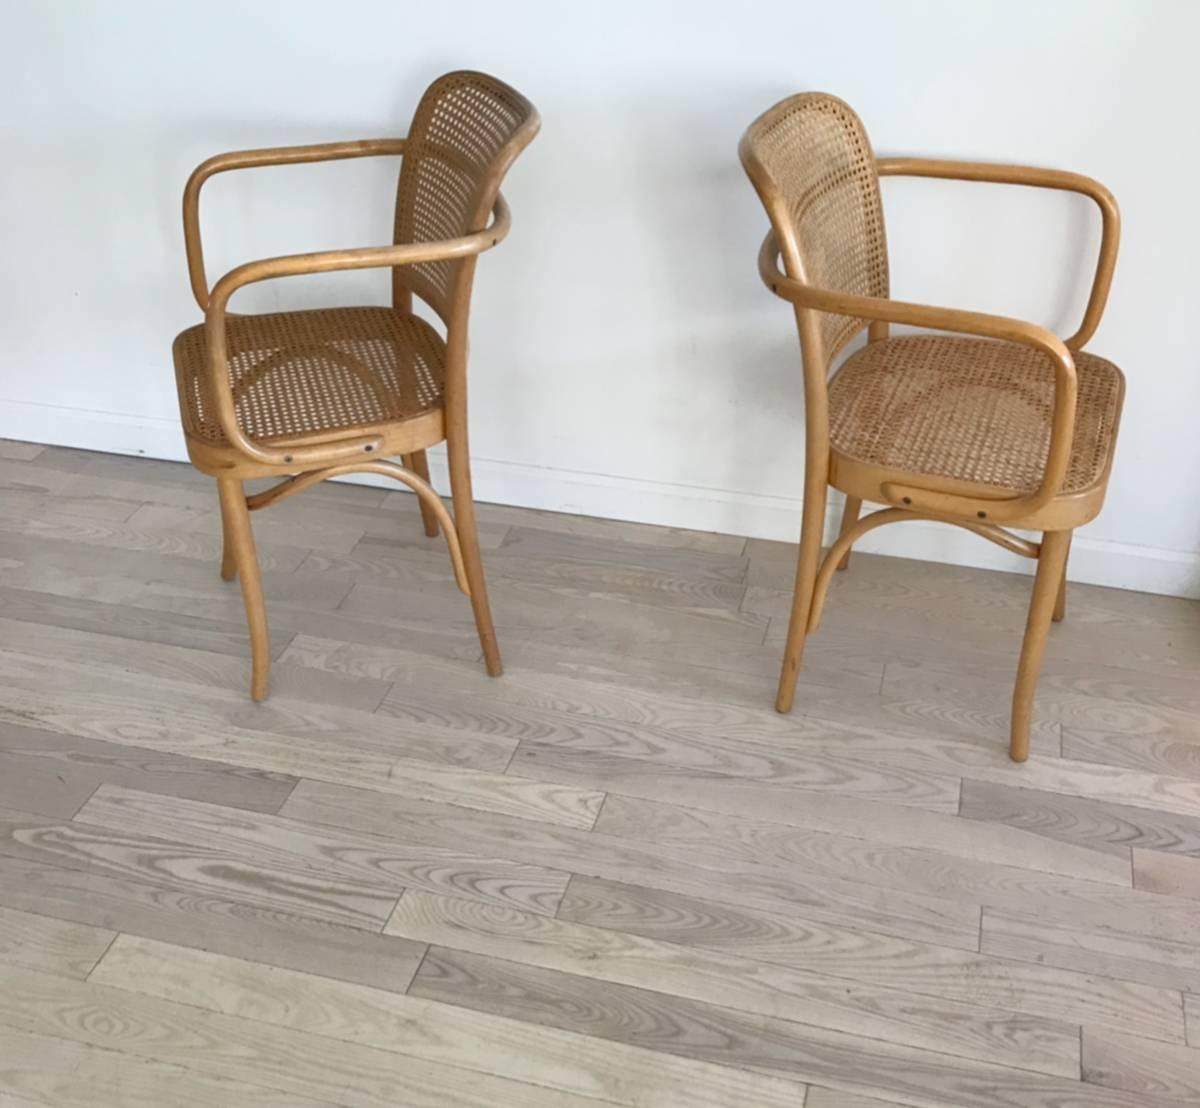 Josef Hoffmann 811 Prague chairs with bentwood arms and cane back and seats. Made in Poland, 1960s, Thonet. Excellent condition. Love these! So classic and timeless. Sold as a pair of two chairs only. All cane intact. Hand canning.
Minor scuff on